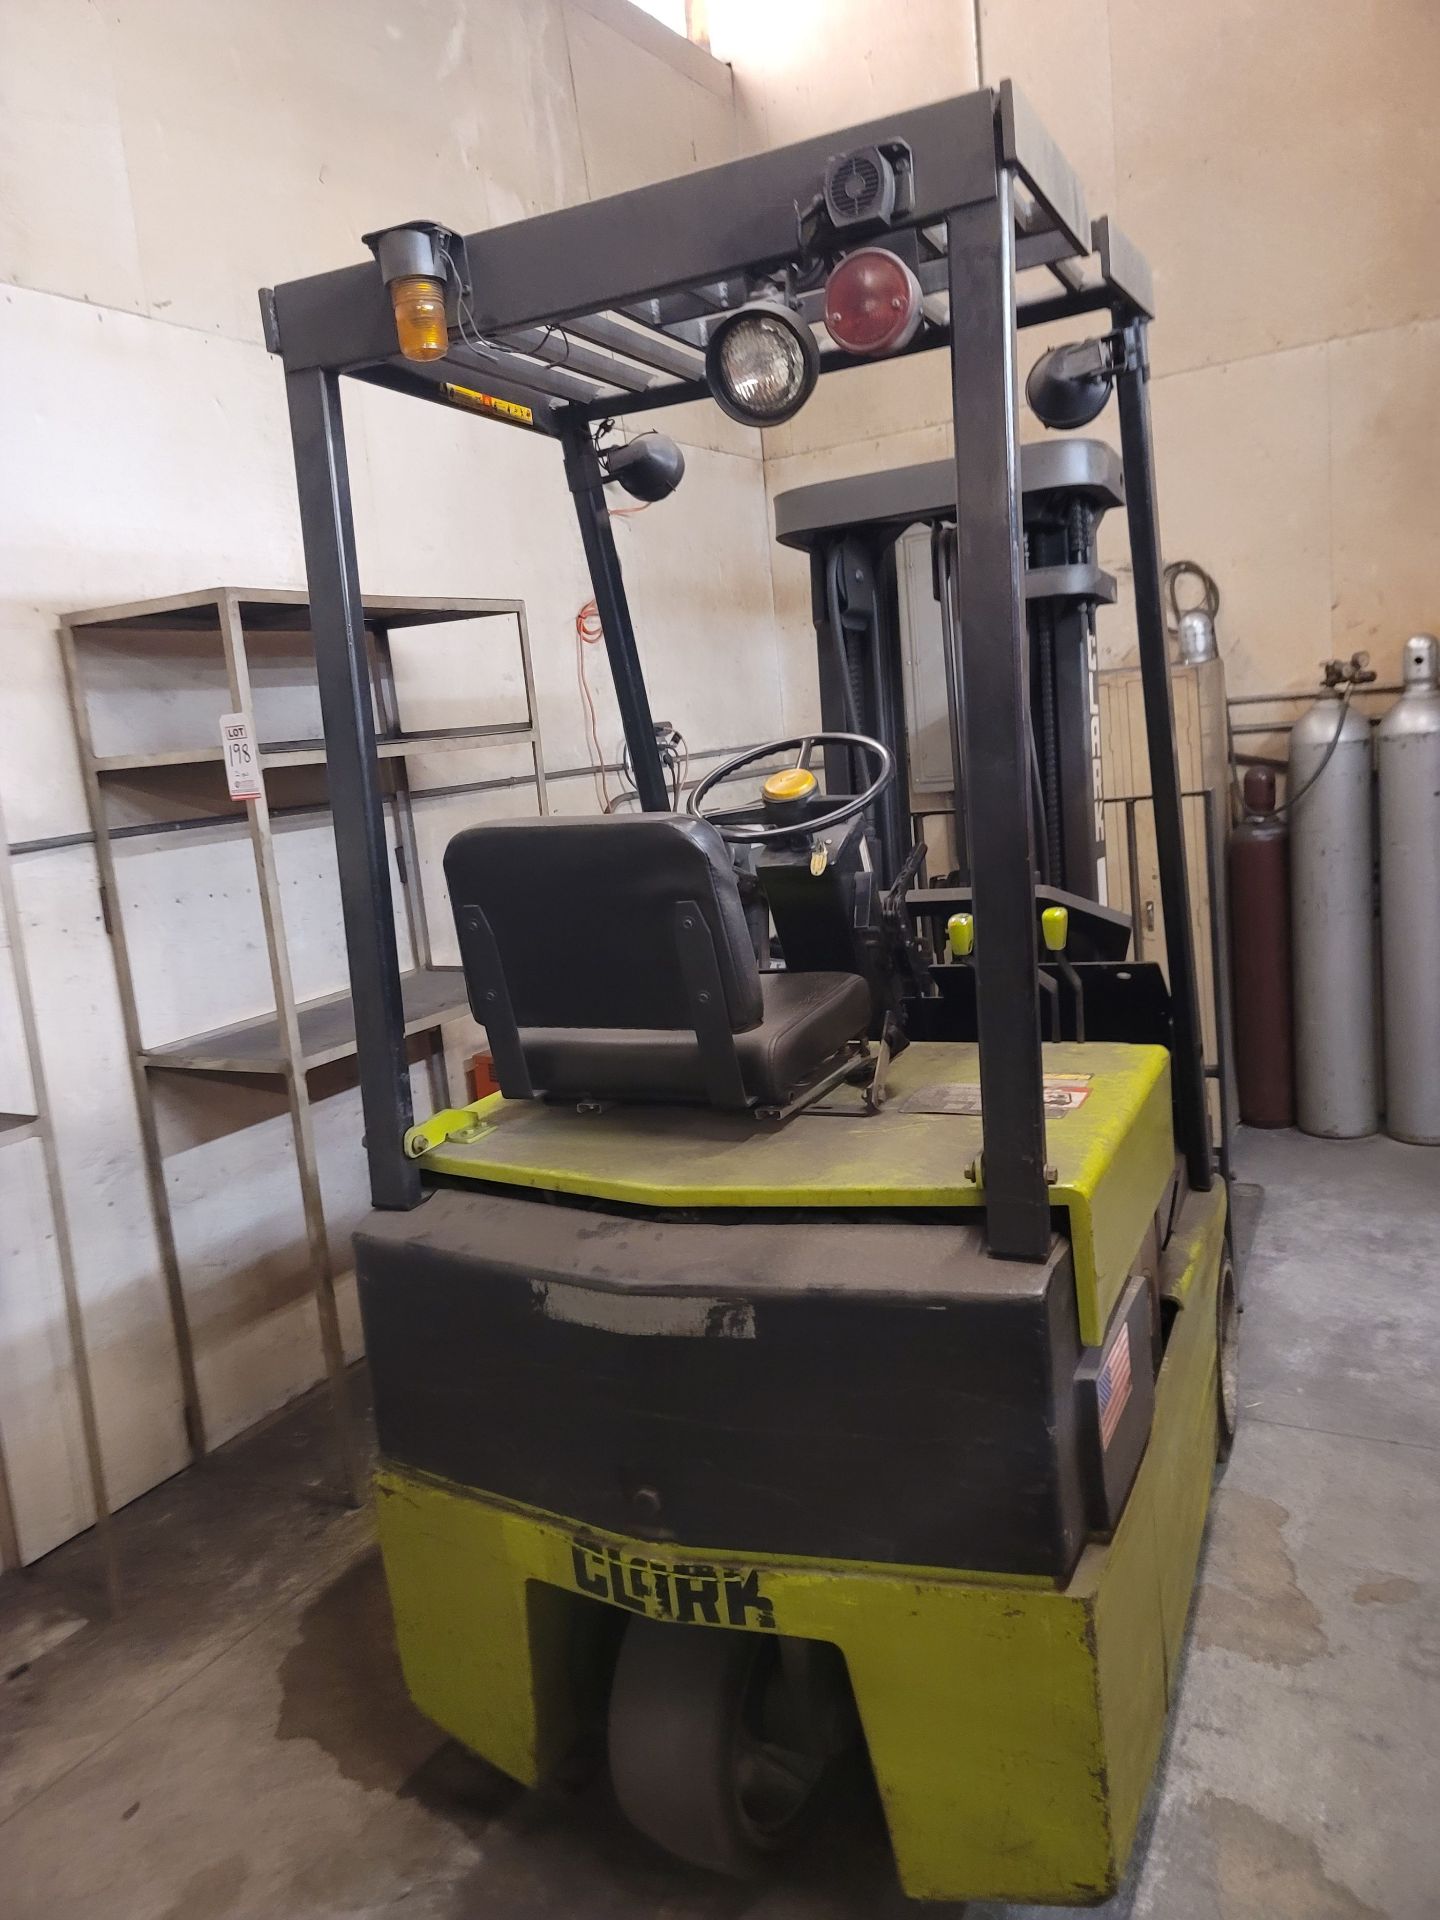 CLARK TM15S ELECTRIC FORKLIFT, 3,000 LB CAPACITY, 3-STAGE MAST, SIDE SHIFT, 188" LIFT HEIGHT, - Image 4 of 8